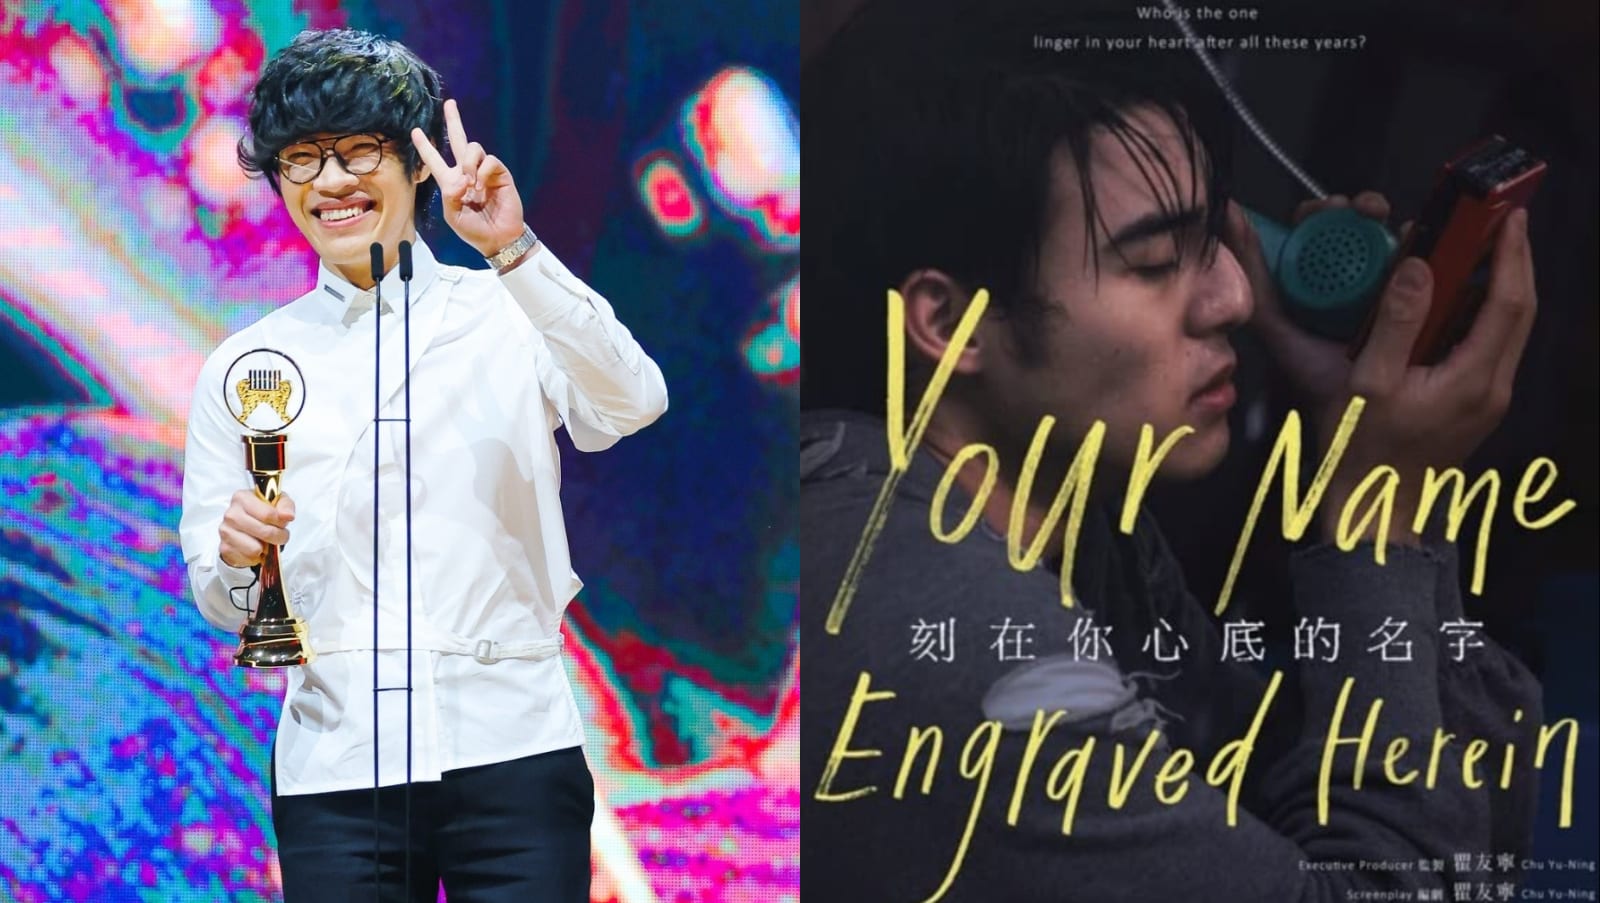 Netizens Want Crowd Lu To Return His Golden Melody Award For 'Your Name Engraved Herein' After Plagiarism Accusations